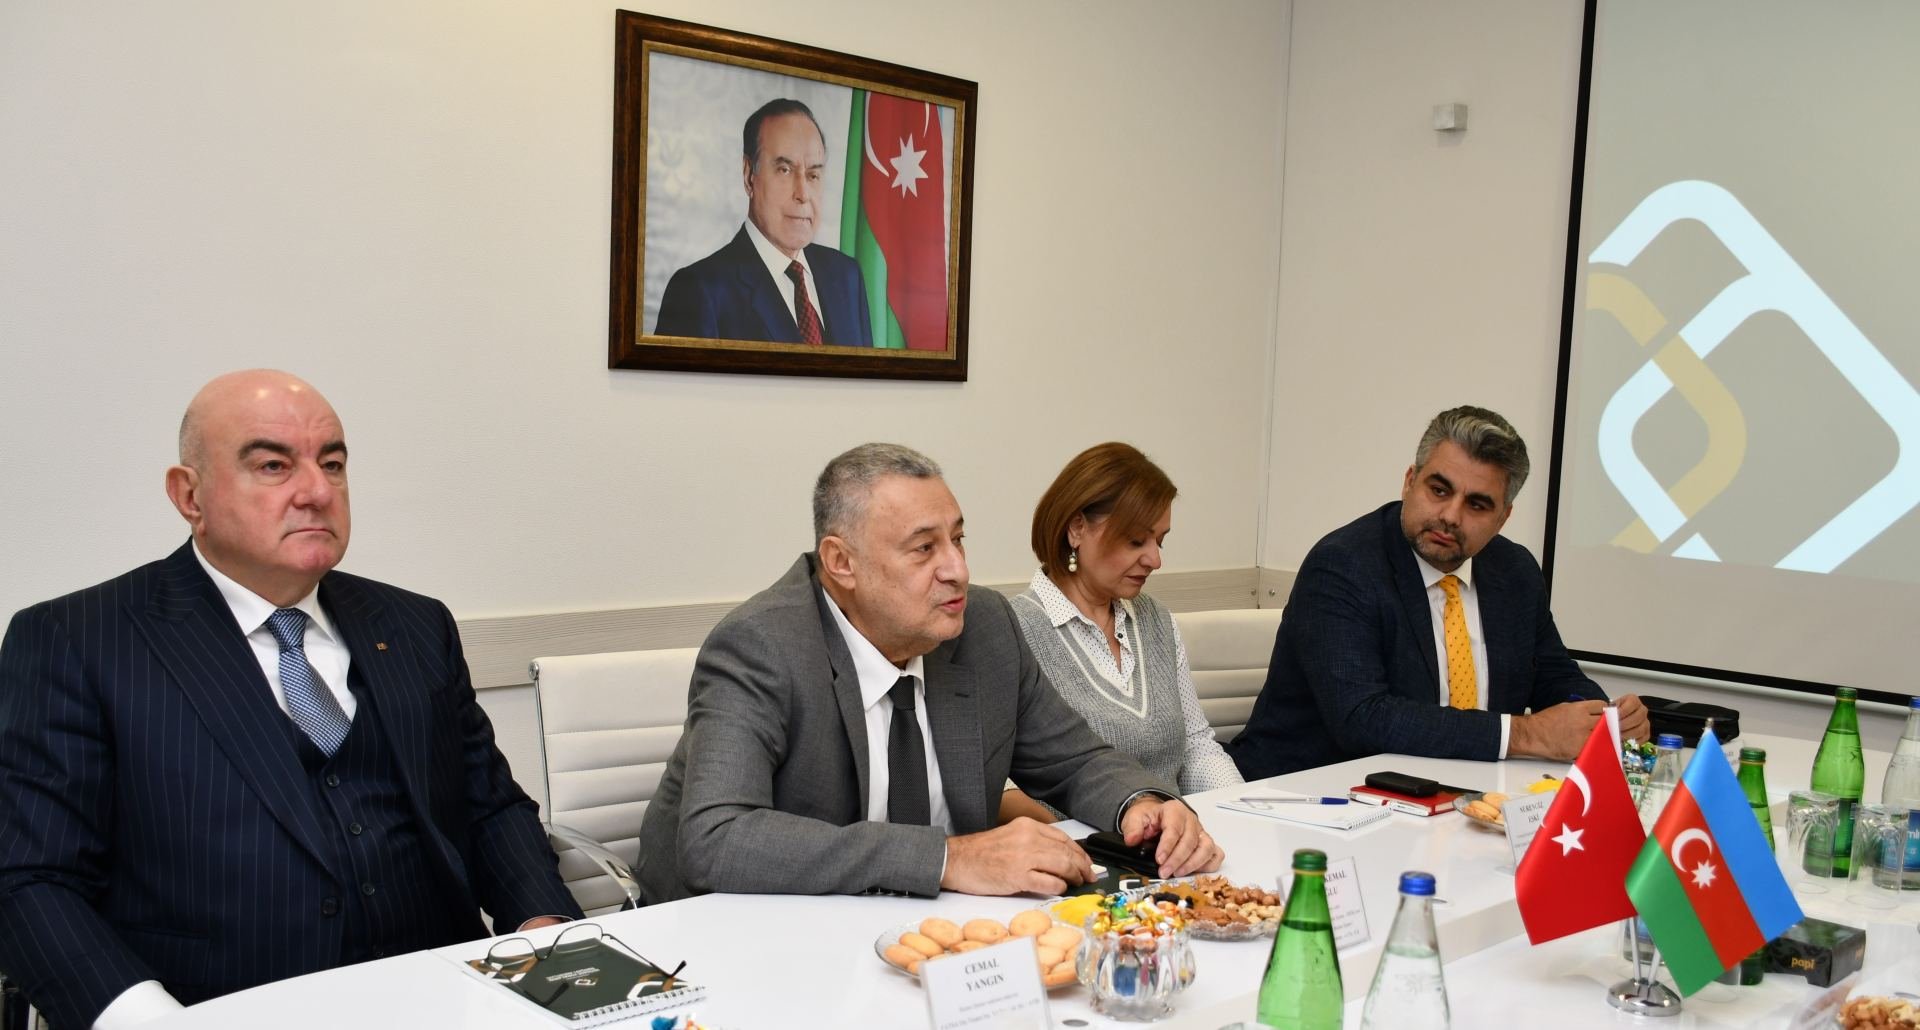 Türkiye aspires to participate in business projects in Azerbaijan's liberated territories